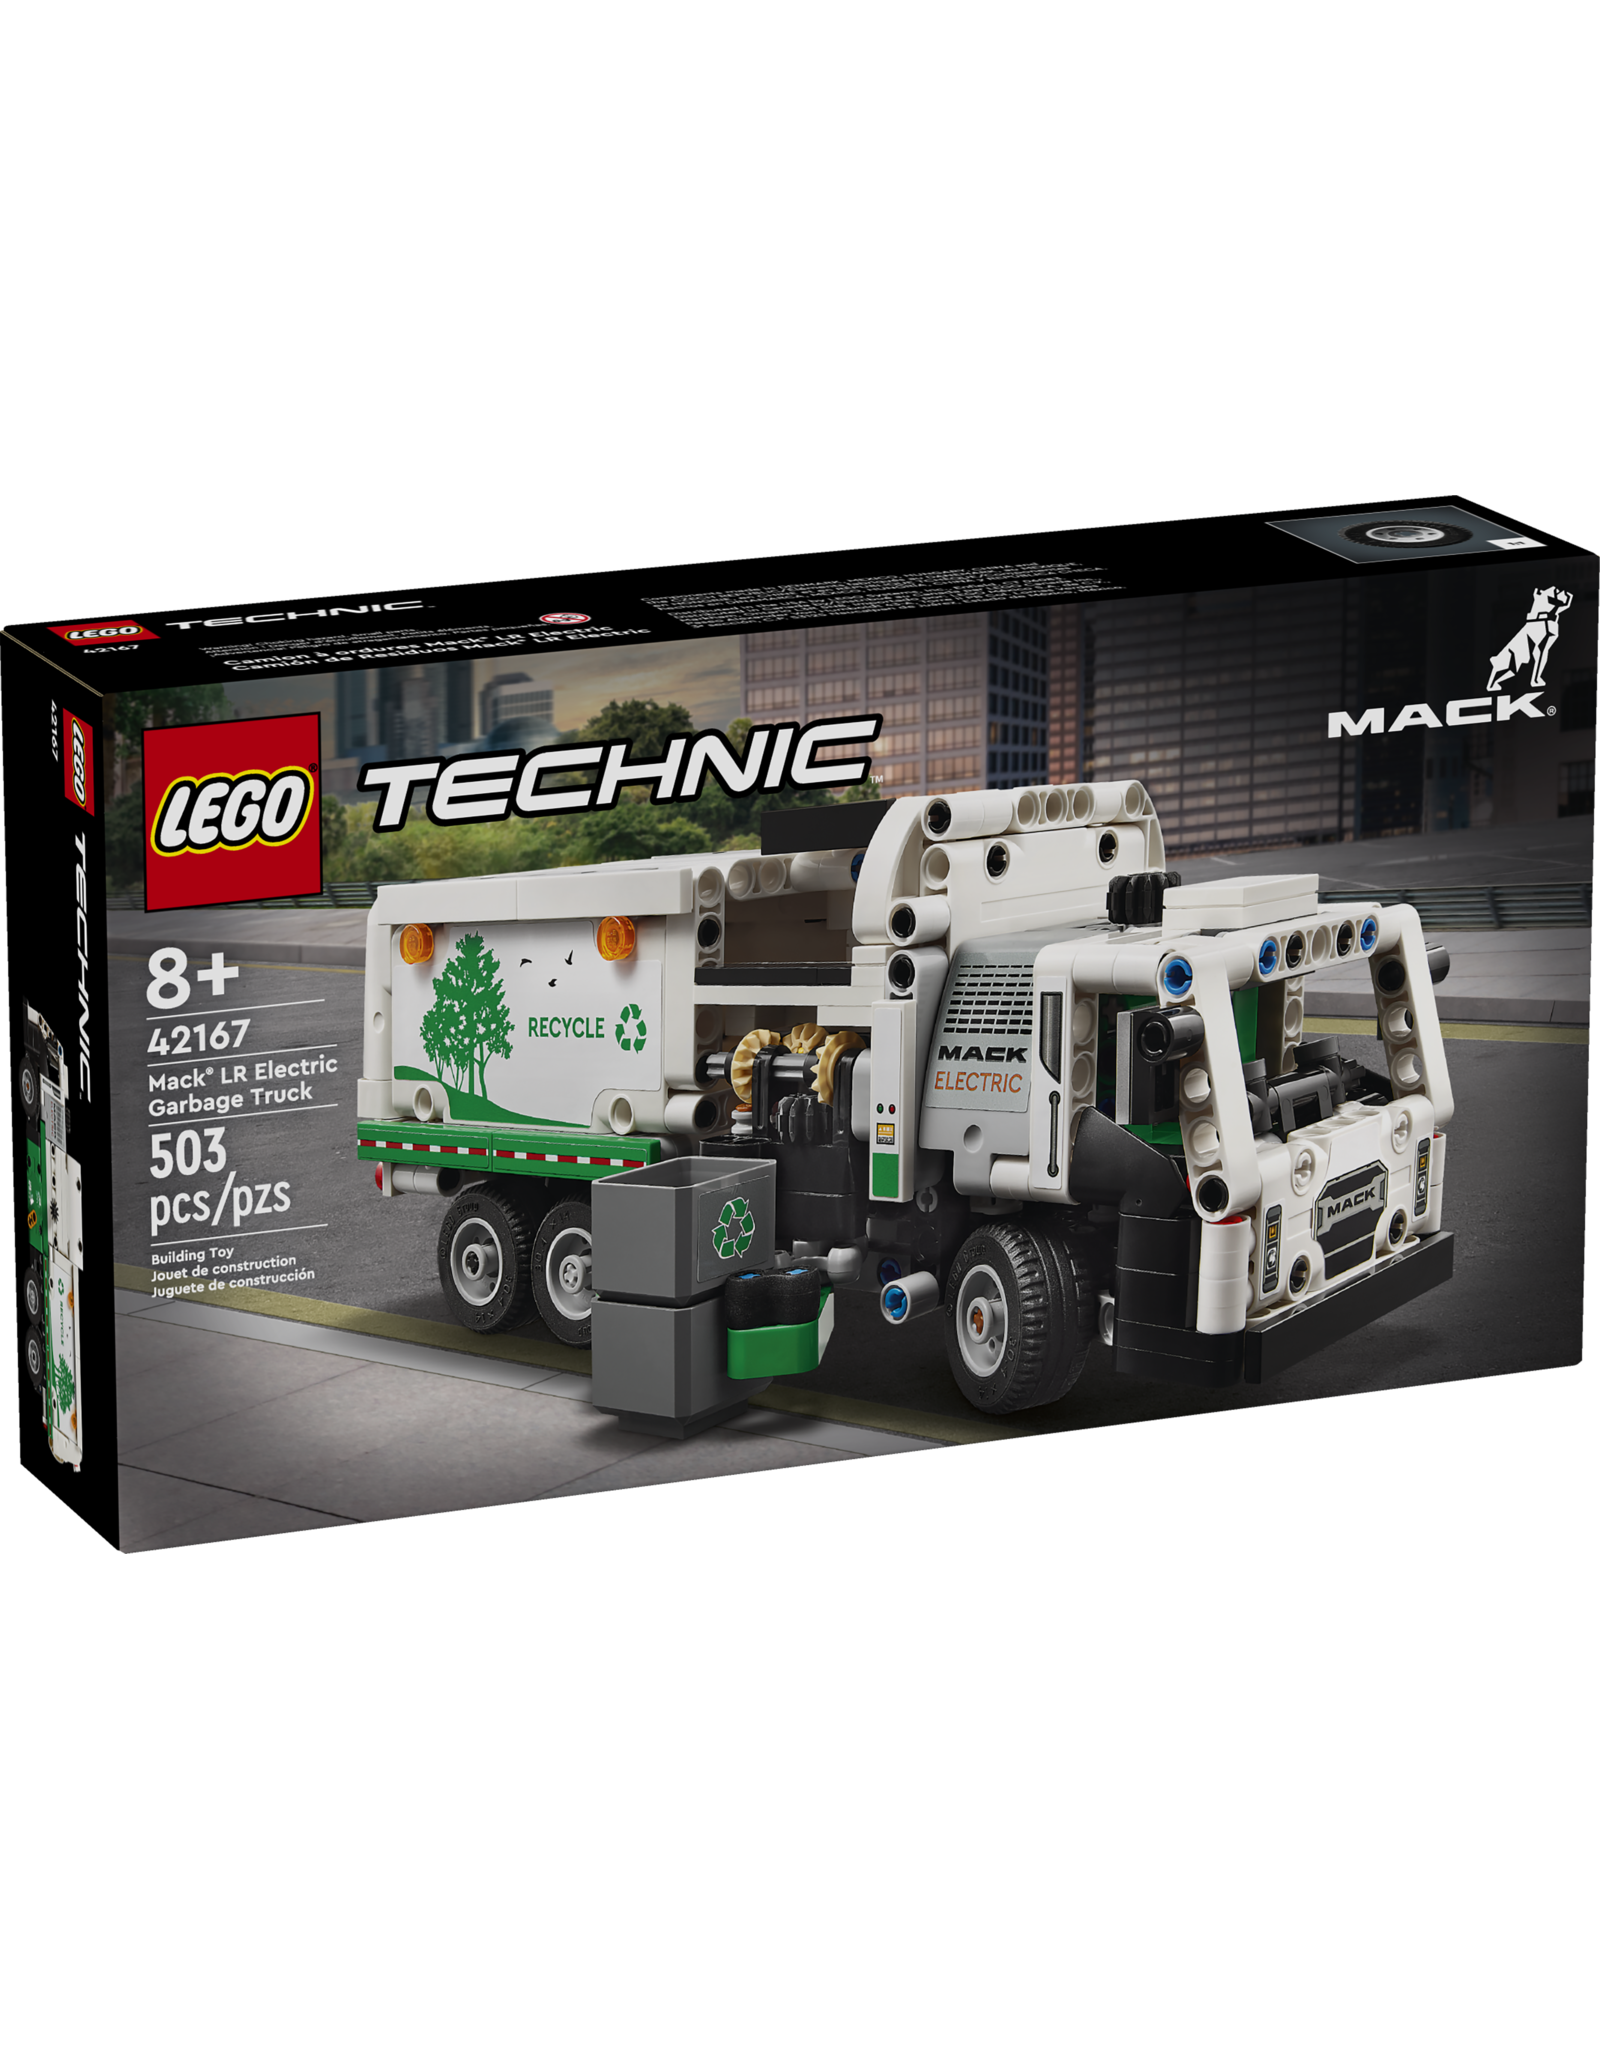 Technic 42167 Mack LR Electric Garbage Truck - The Swag Sisters